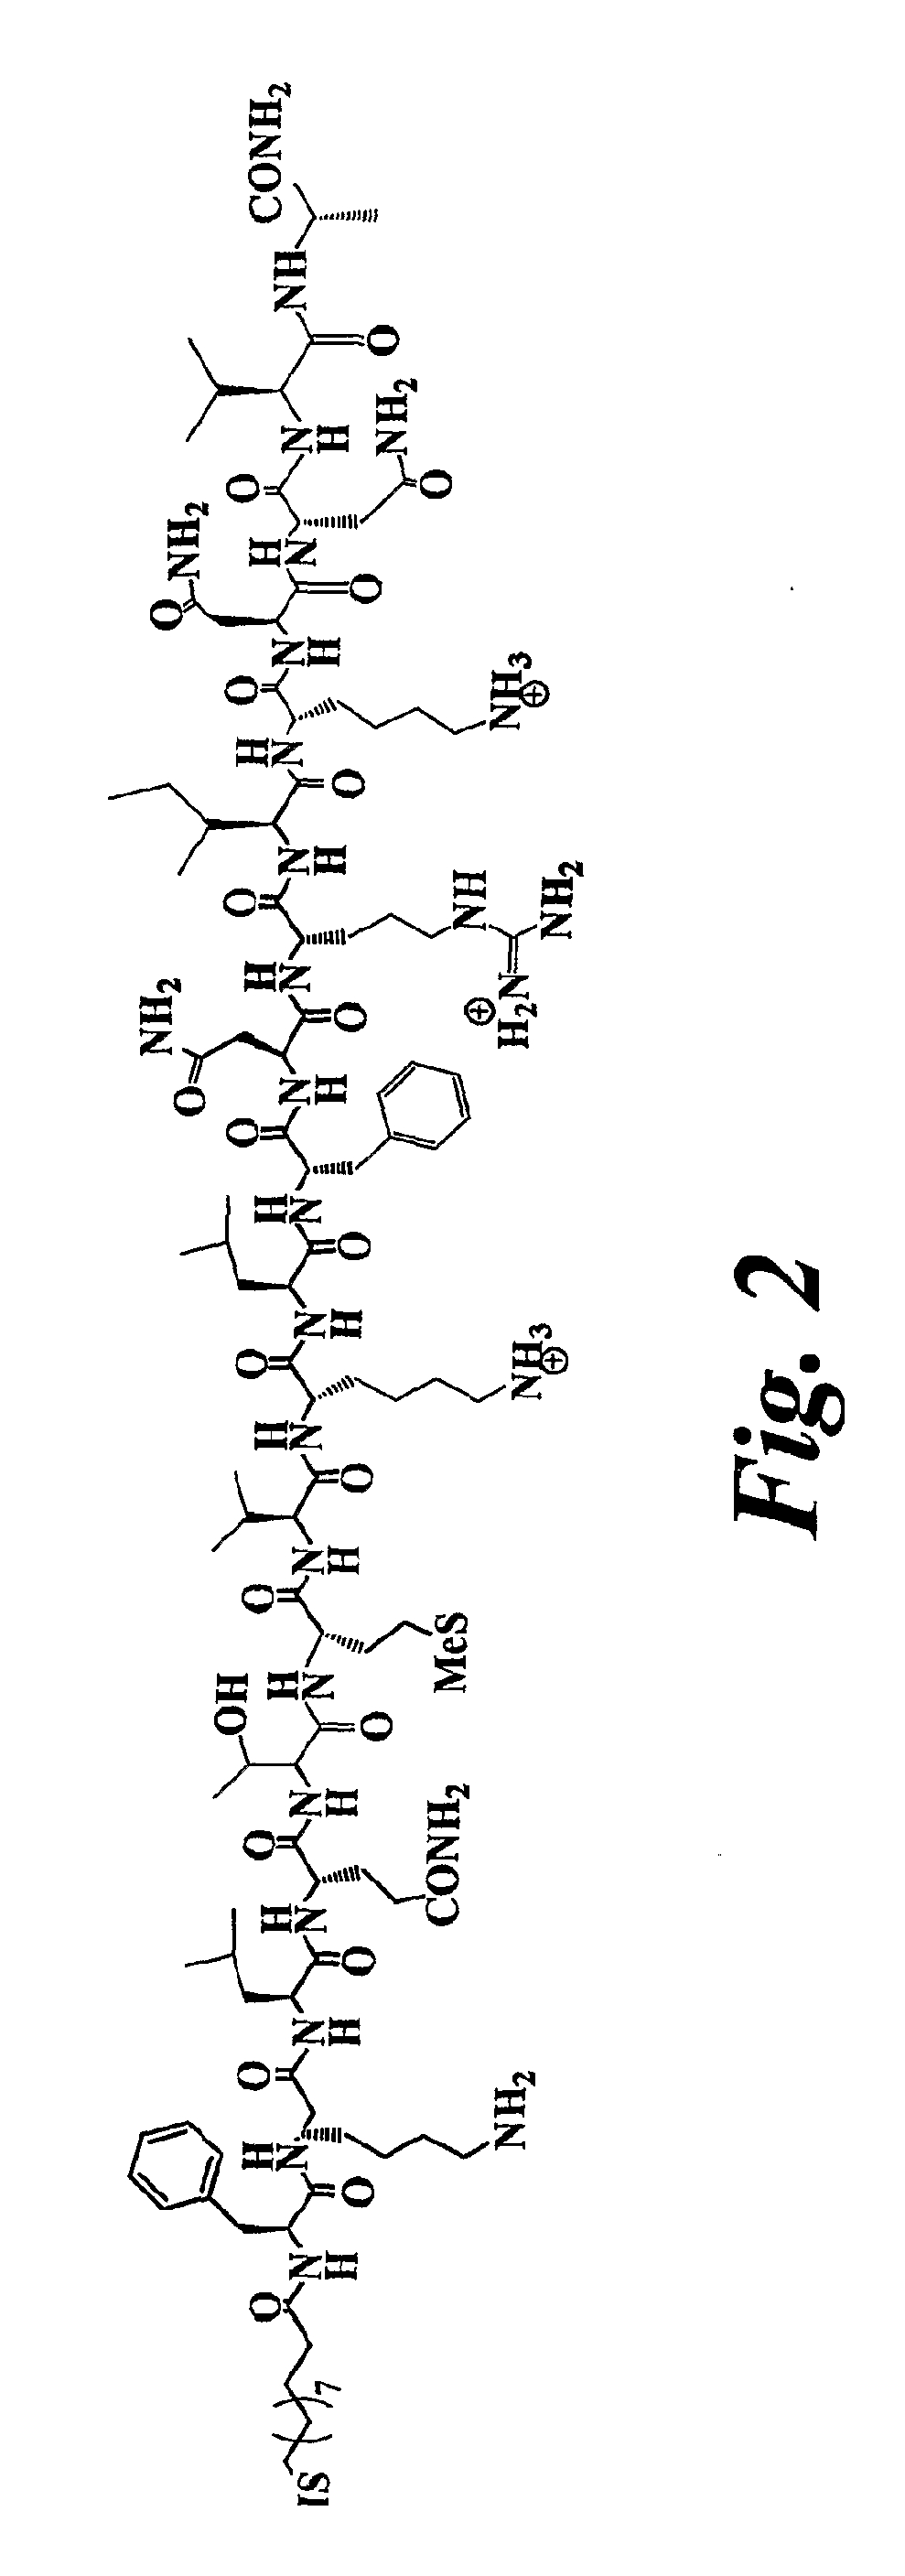 Nanoparticles Comprising Antigens and Adjuvants, and Immunogenic Structures